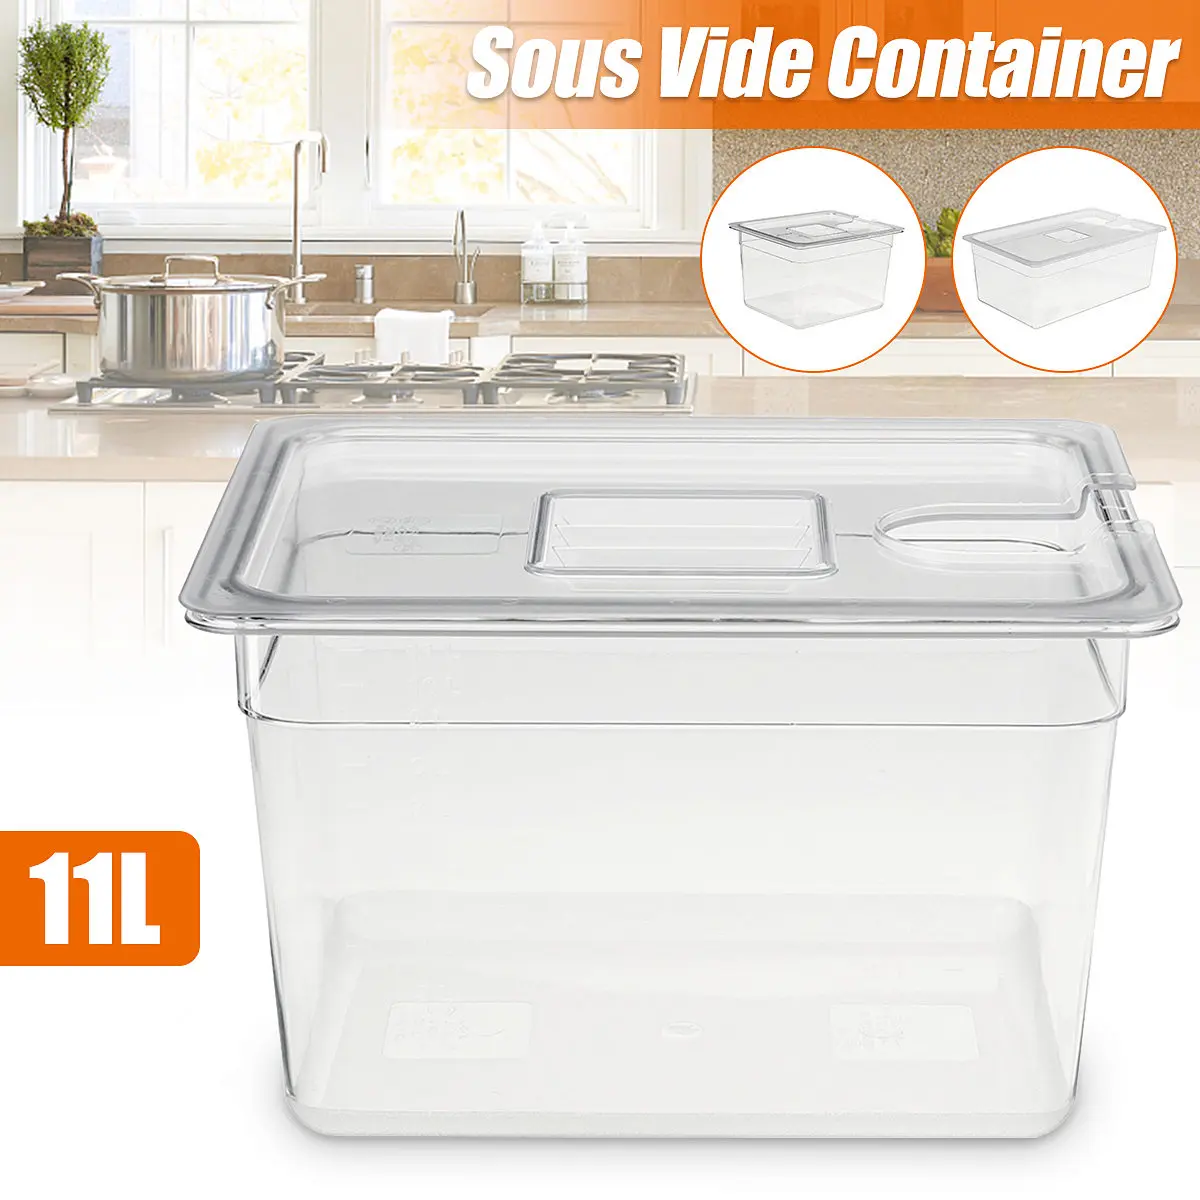 6L 11L Sous Vide Container Water Tank with Lid for Circulato